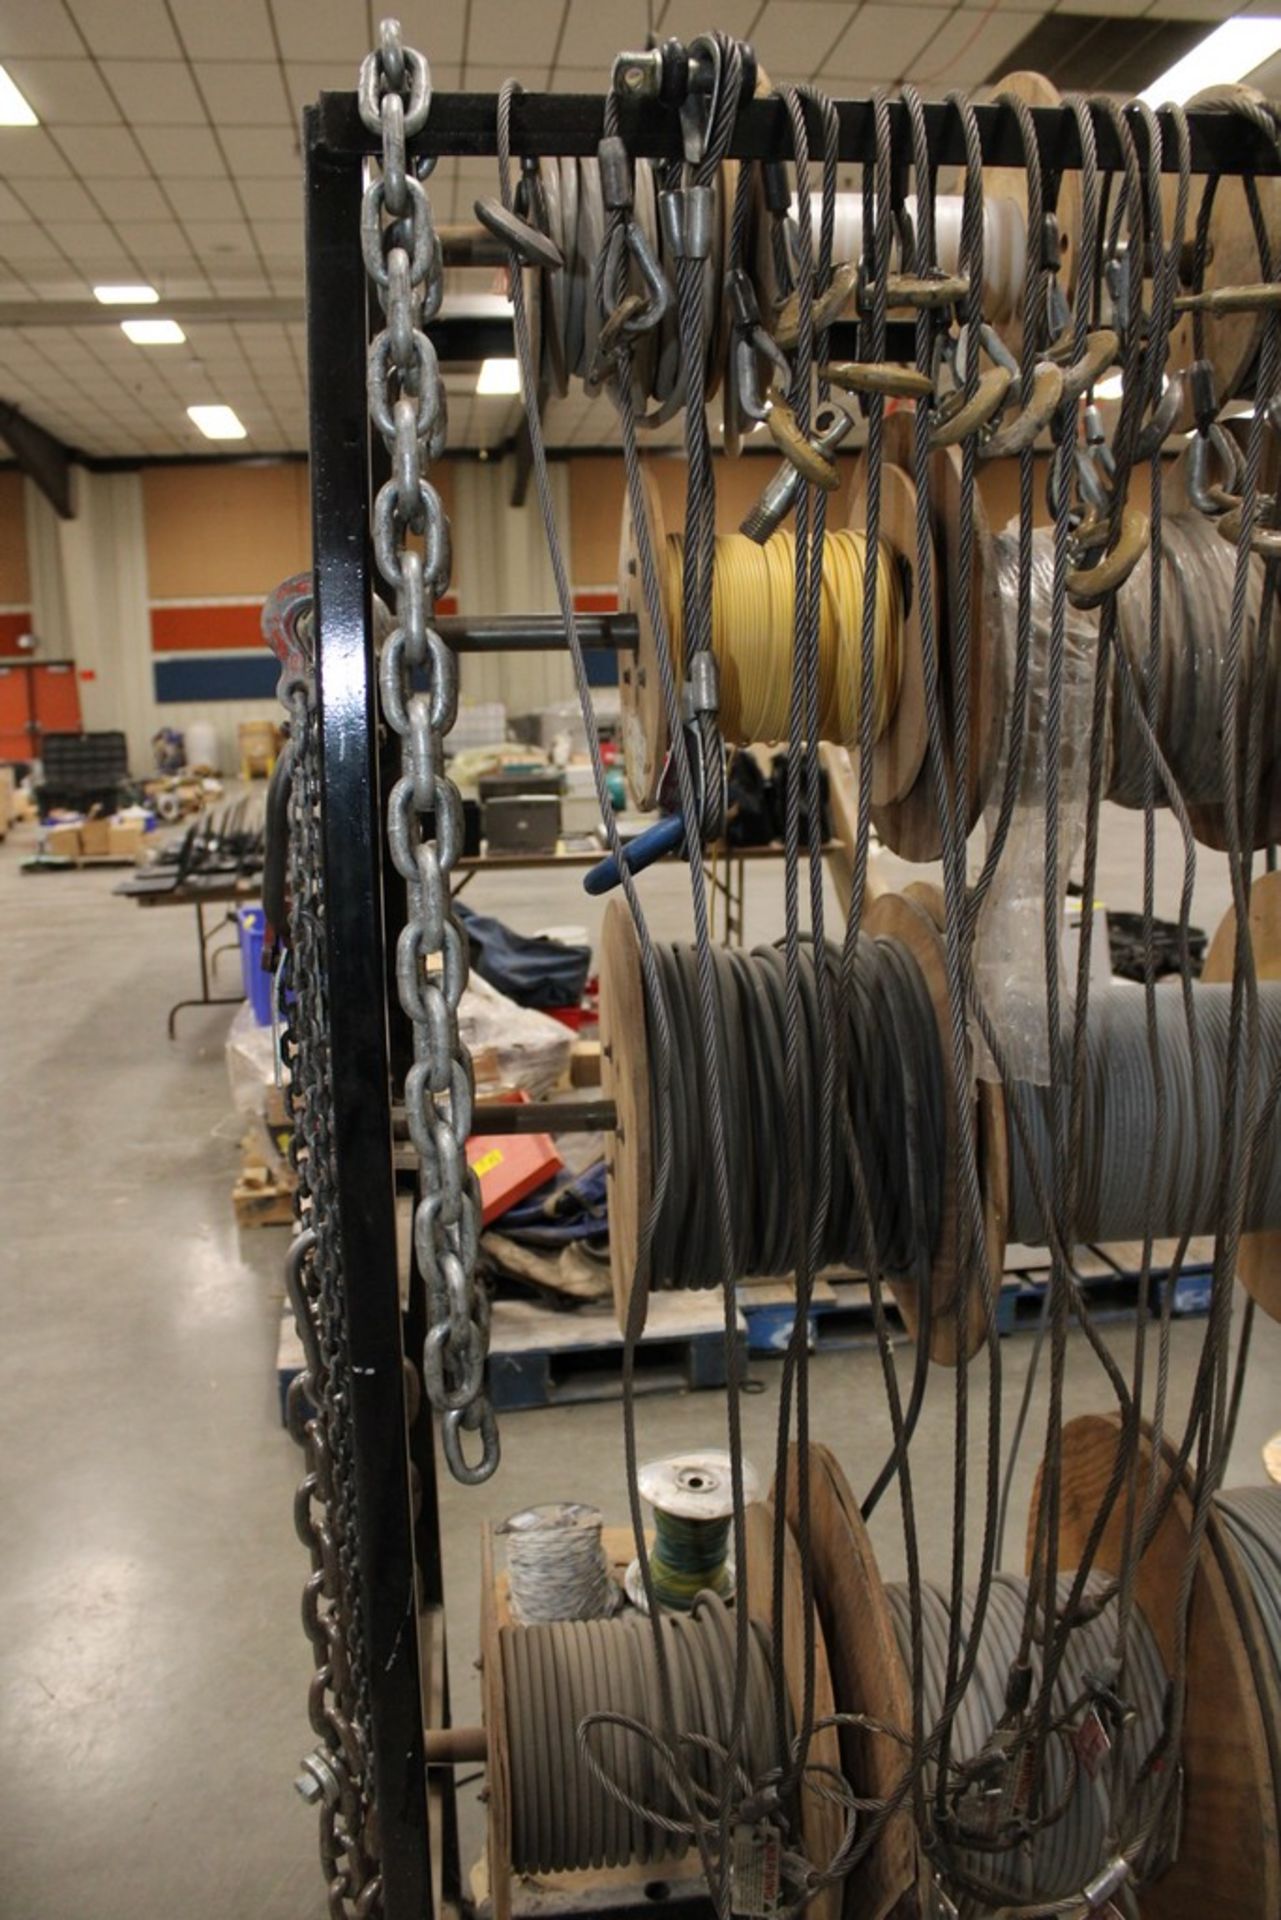 ASSORTED LIFTING CABLES, CHAINS & STRAPS ON RACK (RACK IS NOT INCLUDED) - Image 5 of 6